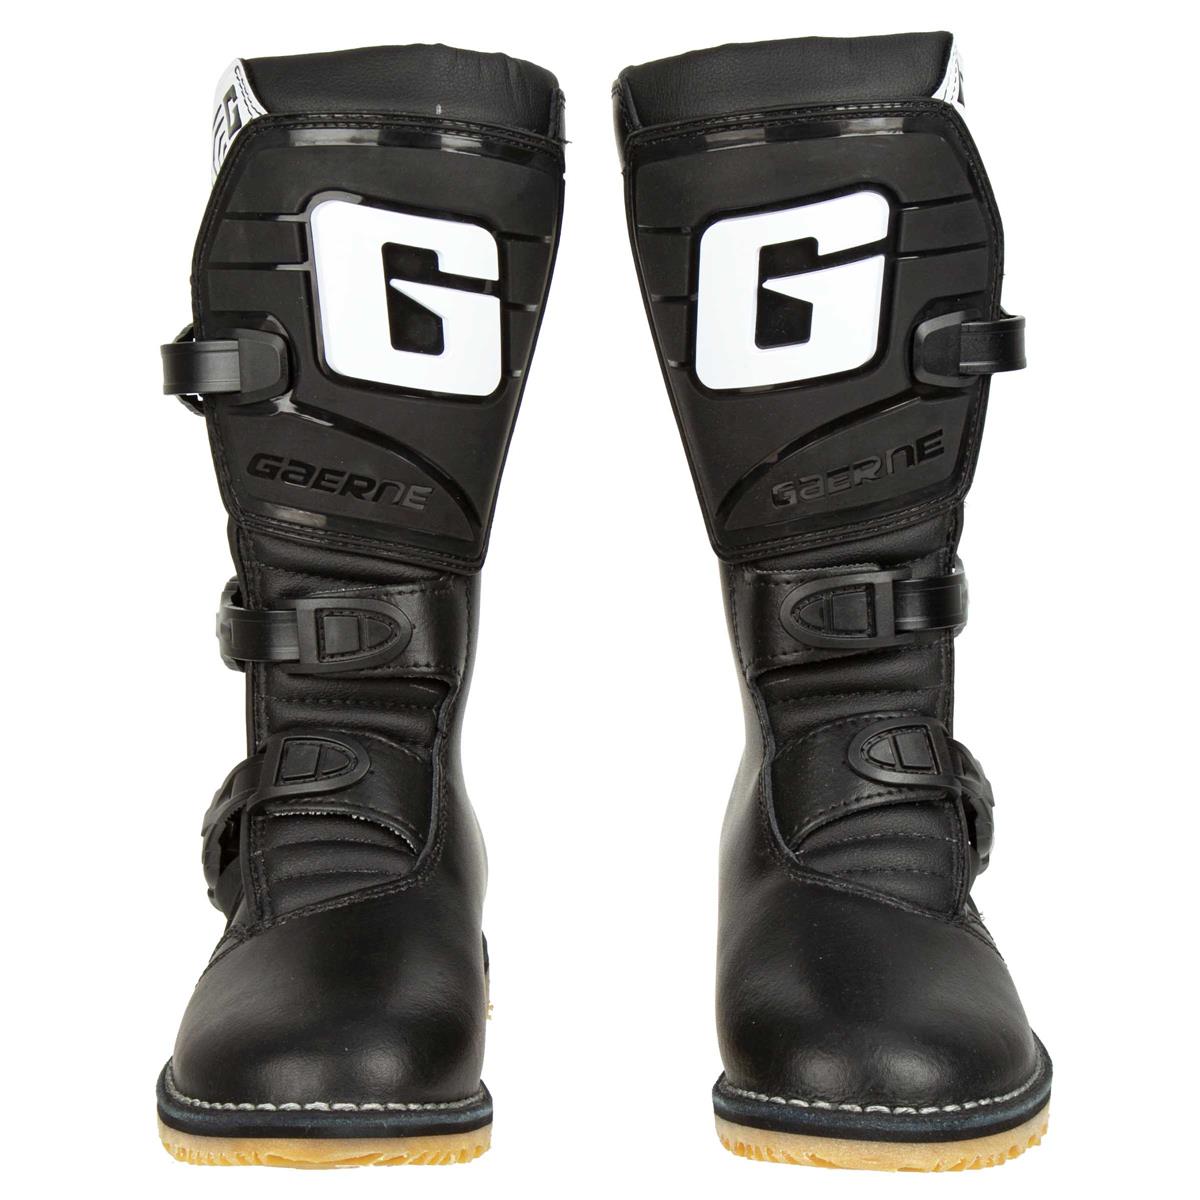 GAERNE BALANCE PRO-TECH BROWN TRIALS BOOTS Clothing, Helmets & Protection  Motocross & Off-Road Clothing